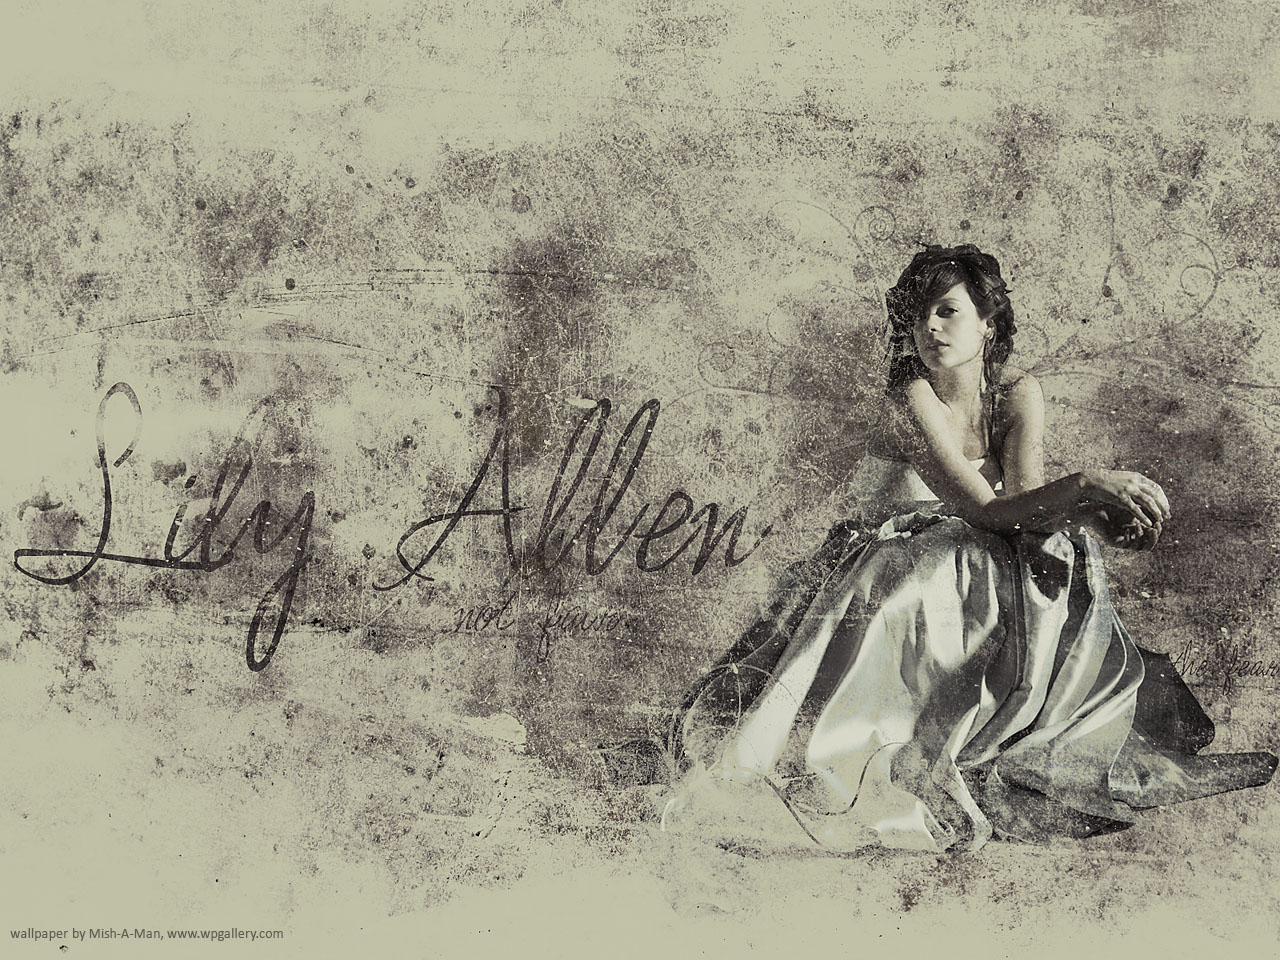 Lily Allen for 1280 x 960 resolution